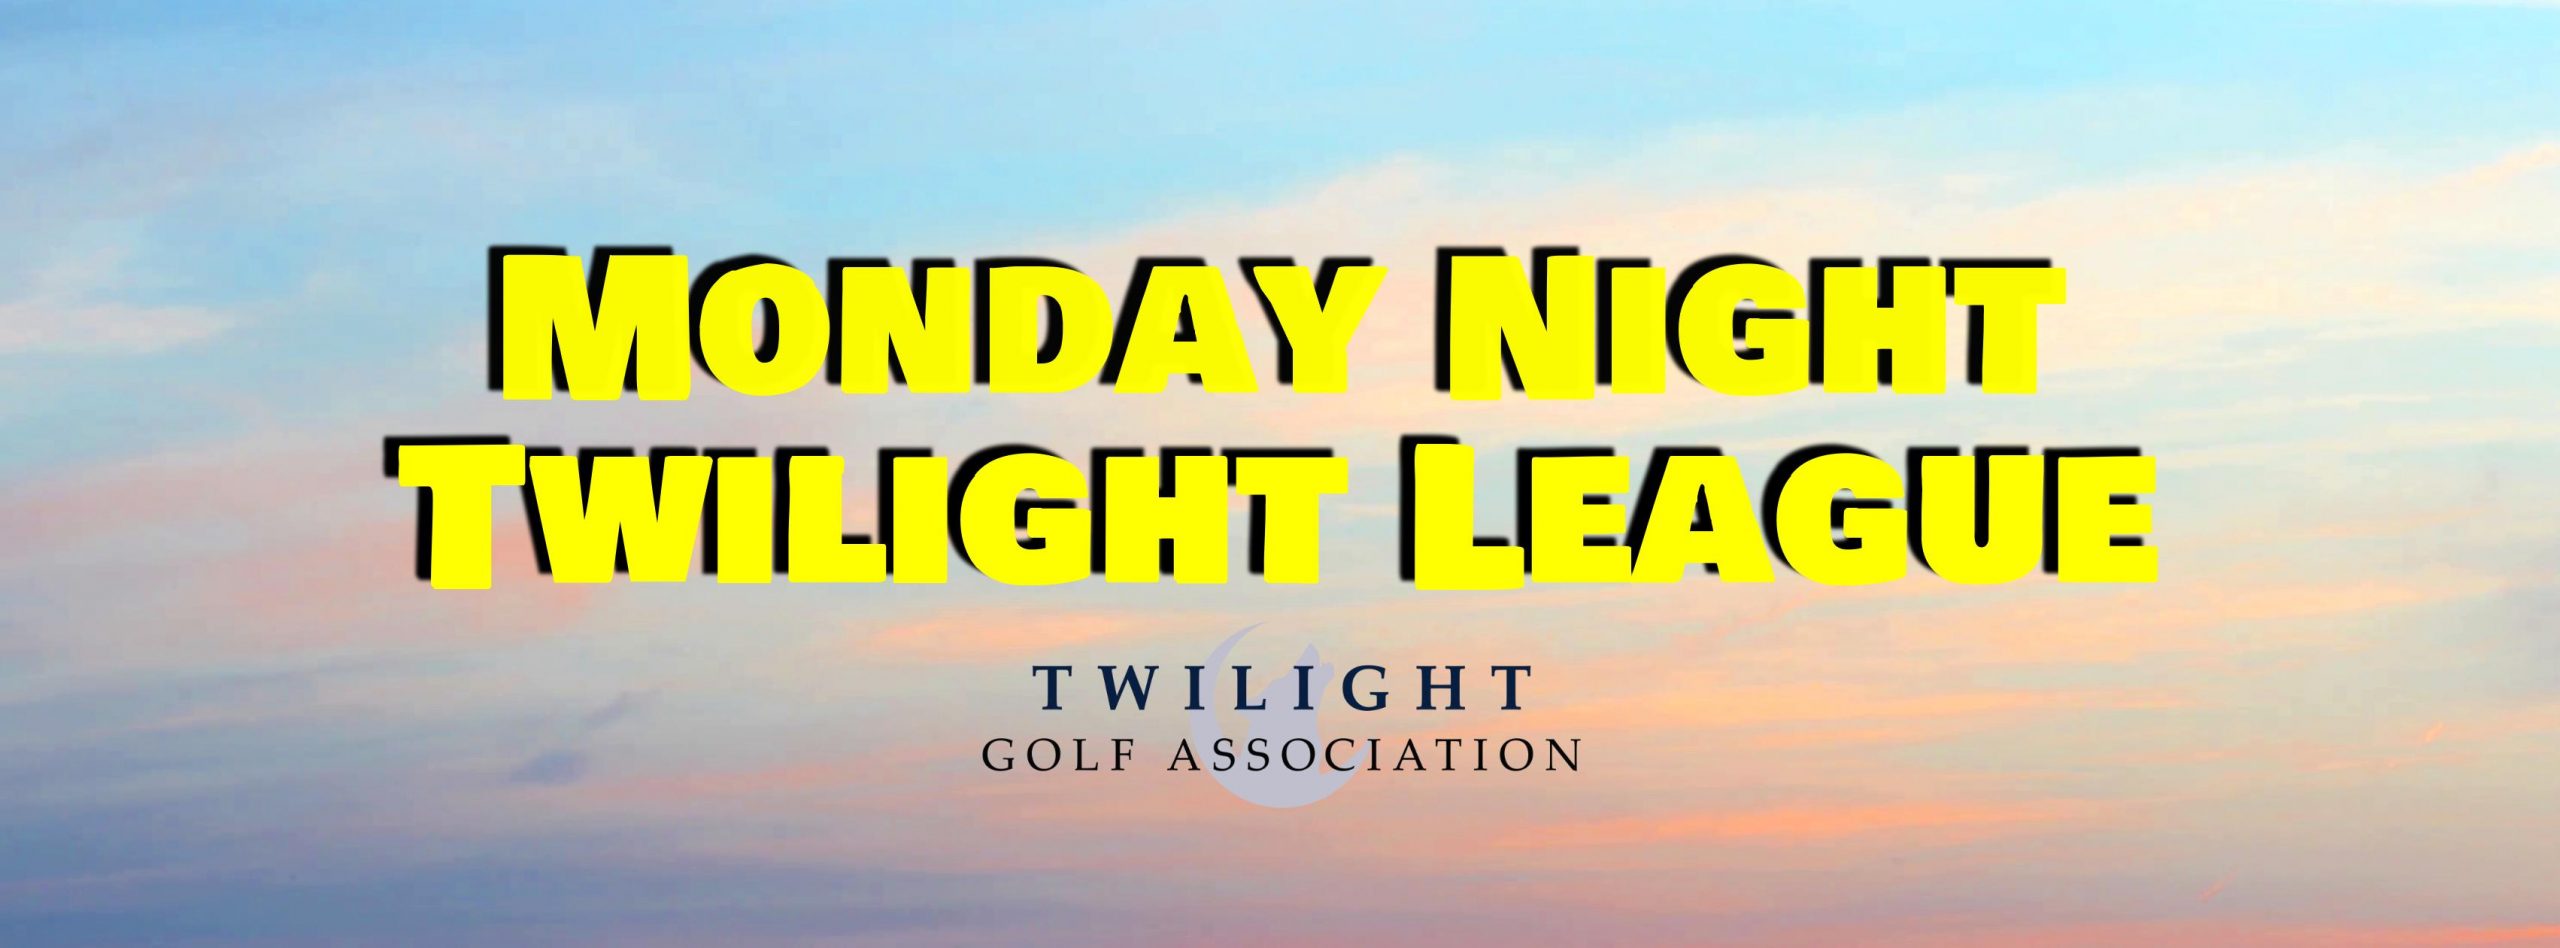 Monday Twilight League at DeBell Golf Club